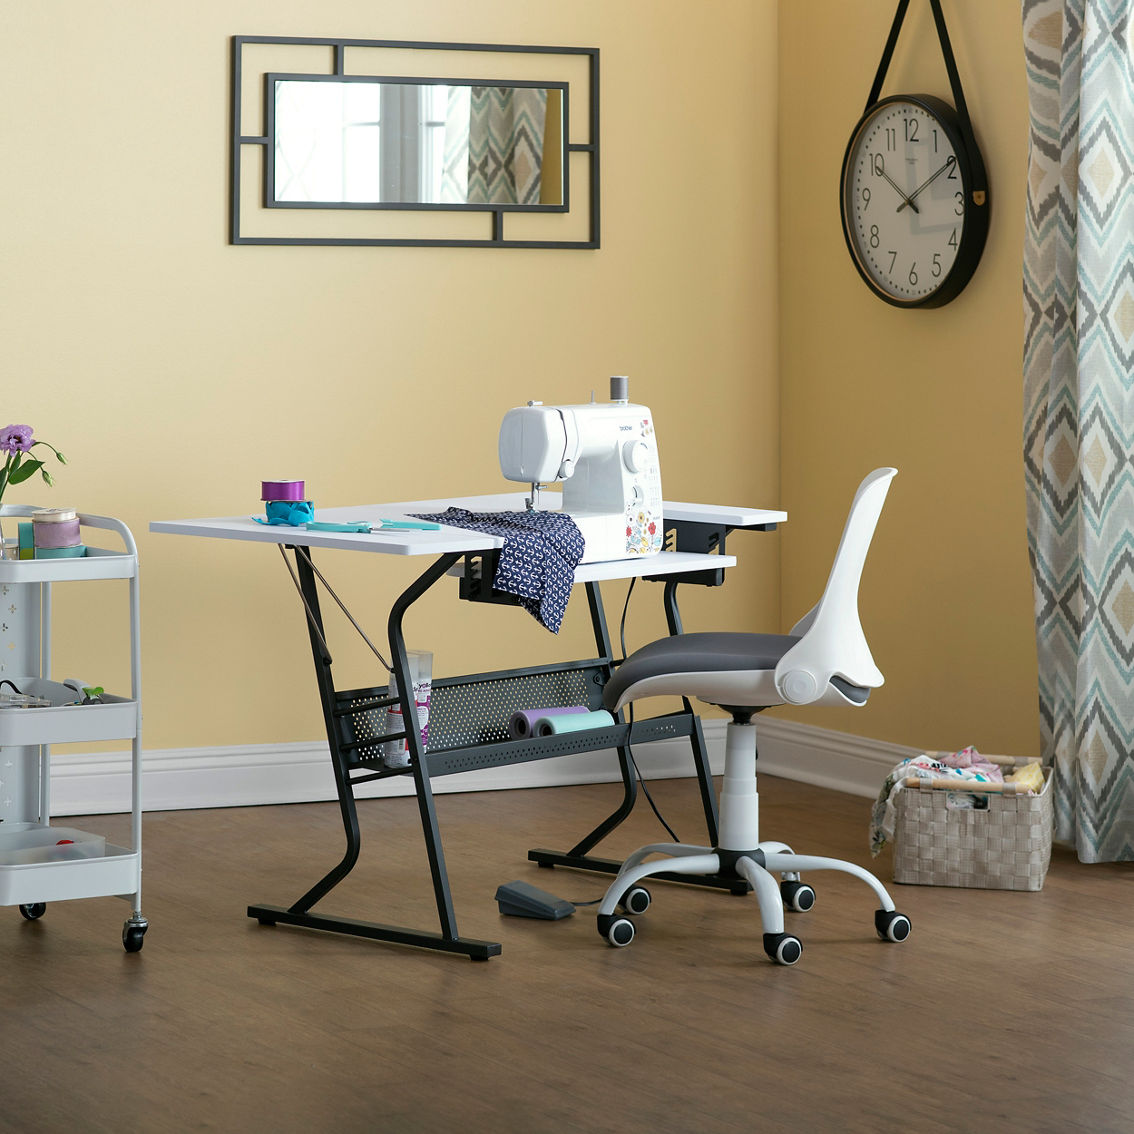 Studio Designs Sew Ready Eclipse Hobby Table - Image 9 of 9